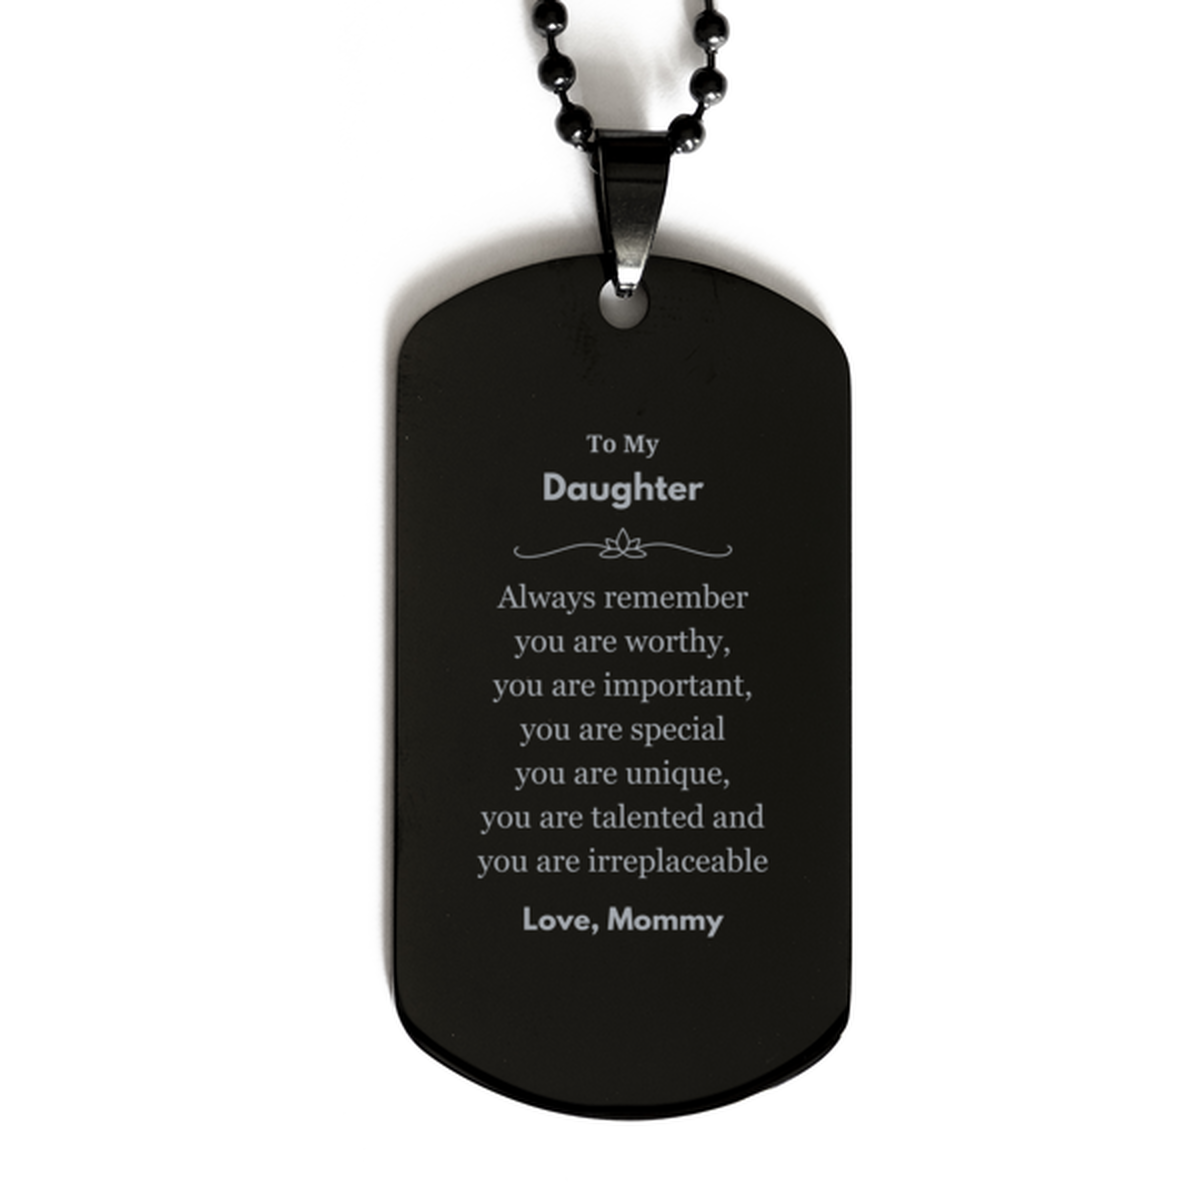 Daughter Birthday Gifts from Mommy, Inspirational Black Dog Tag for Daughter Christmas Graduation Gifts for Daughter Always remember you are worthy, you are important. Love, Mommy